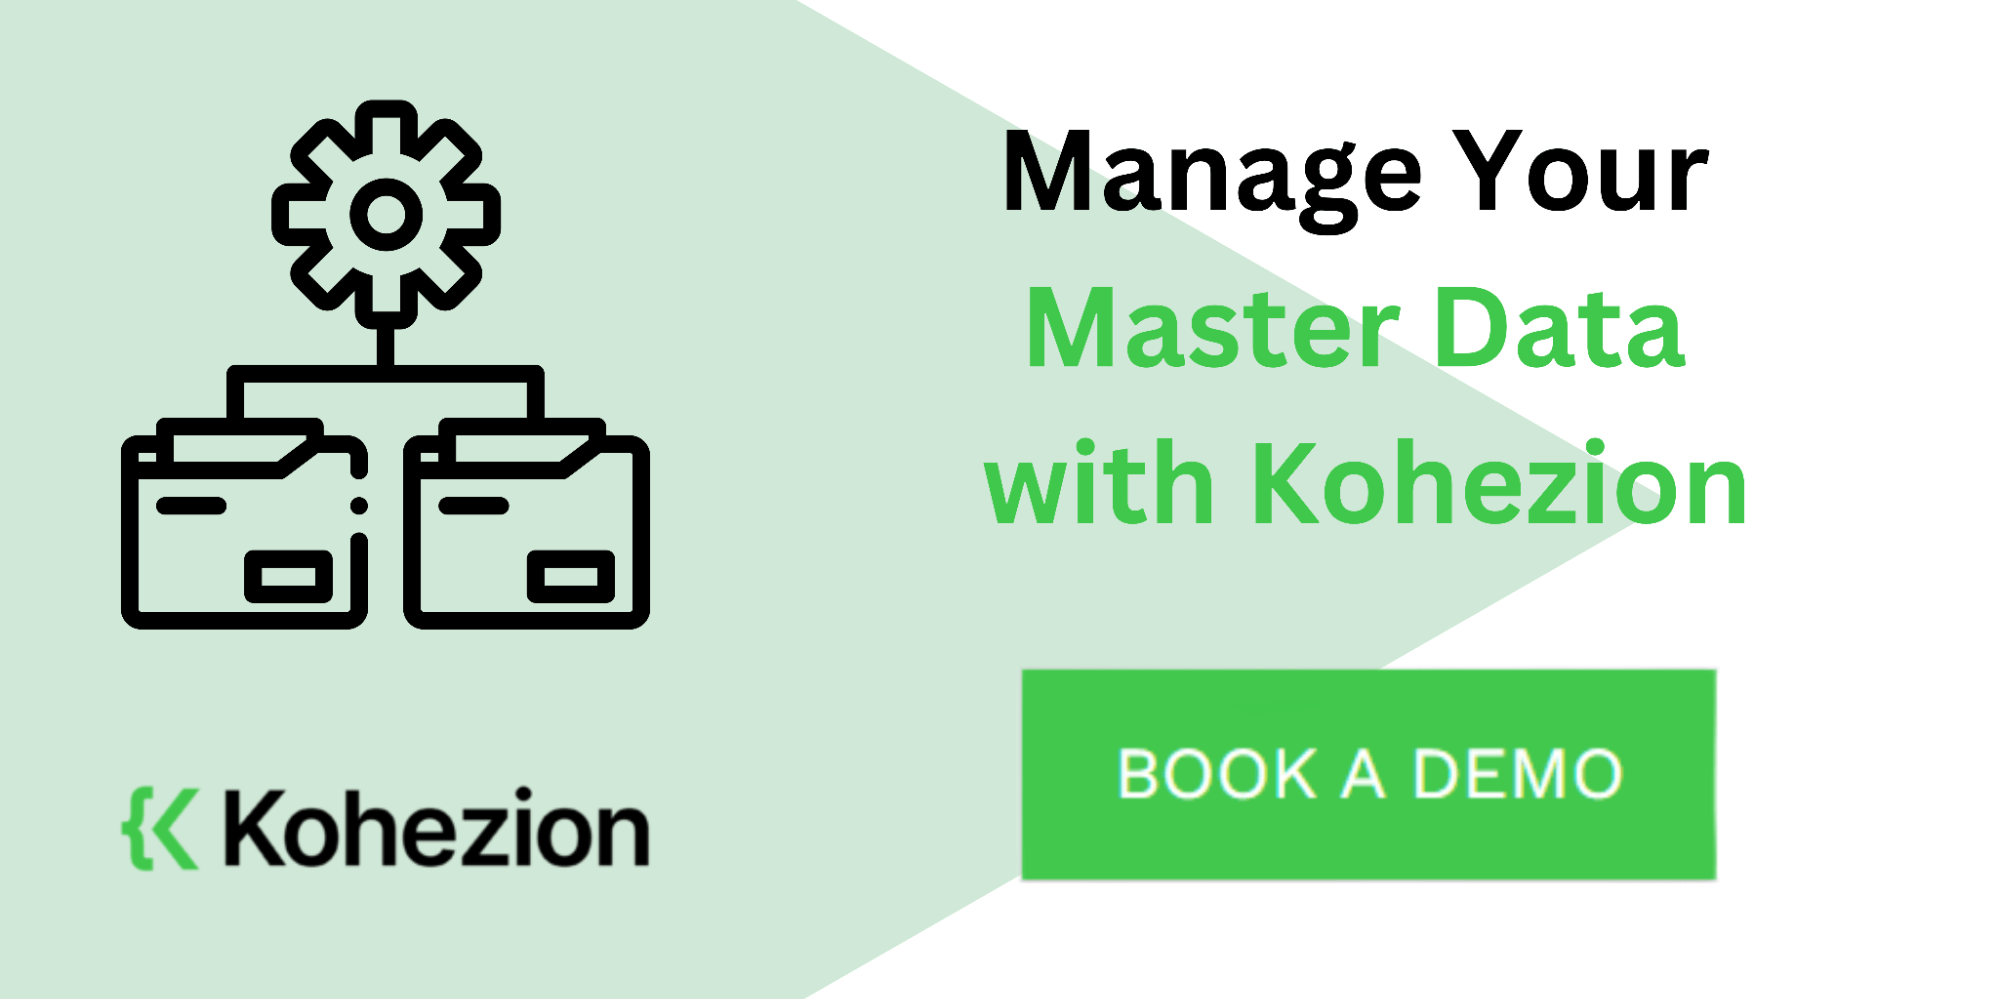 manage your software assets with kohezion